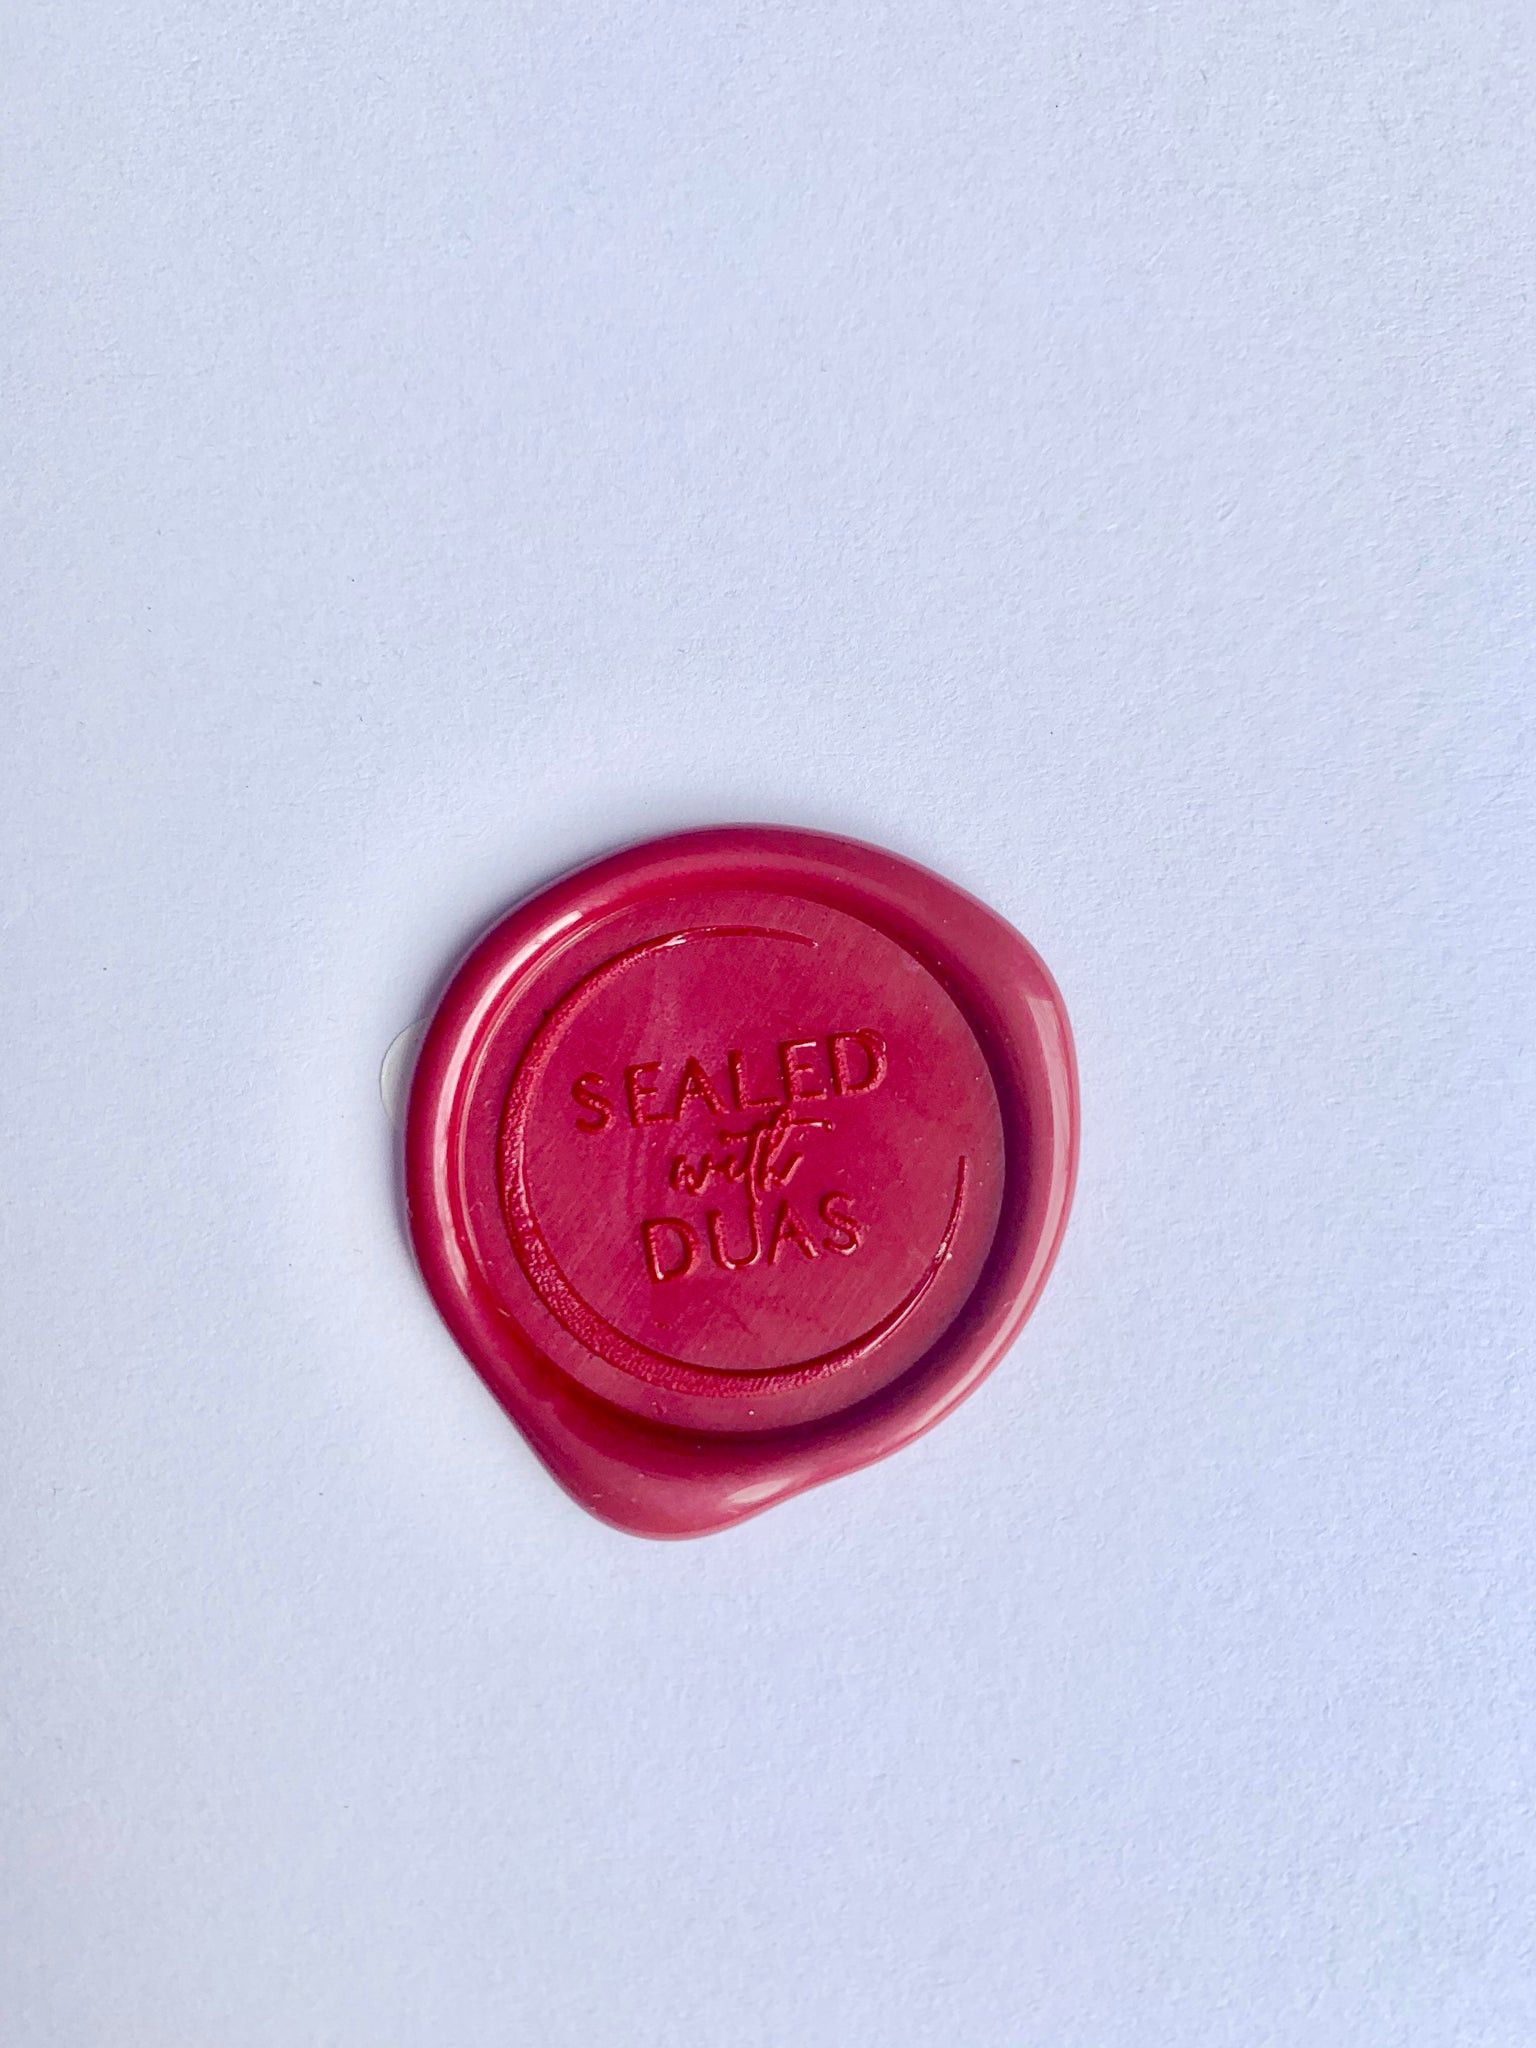 Sealed With Duas Wax Seal